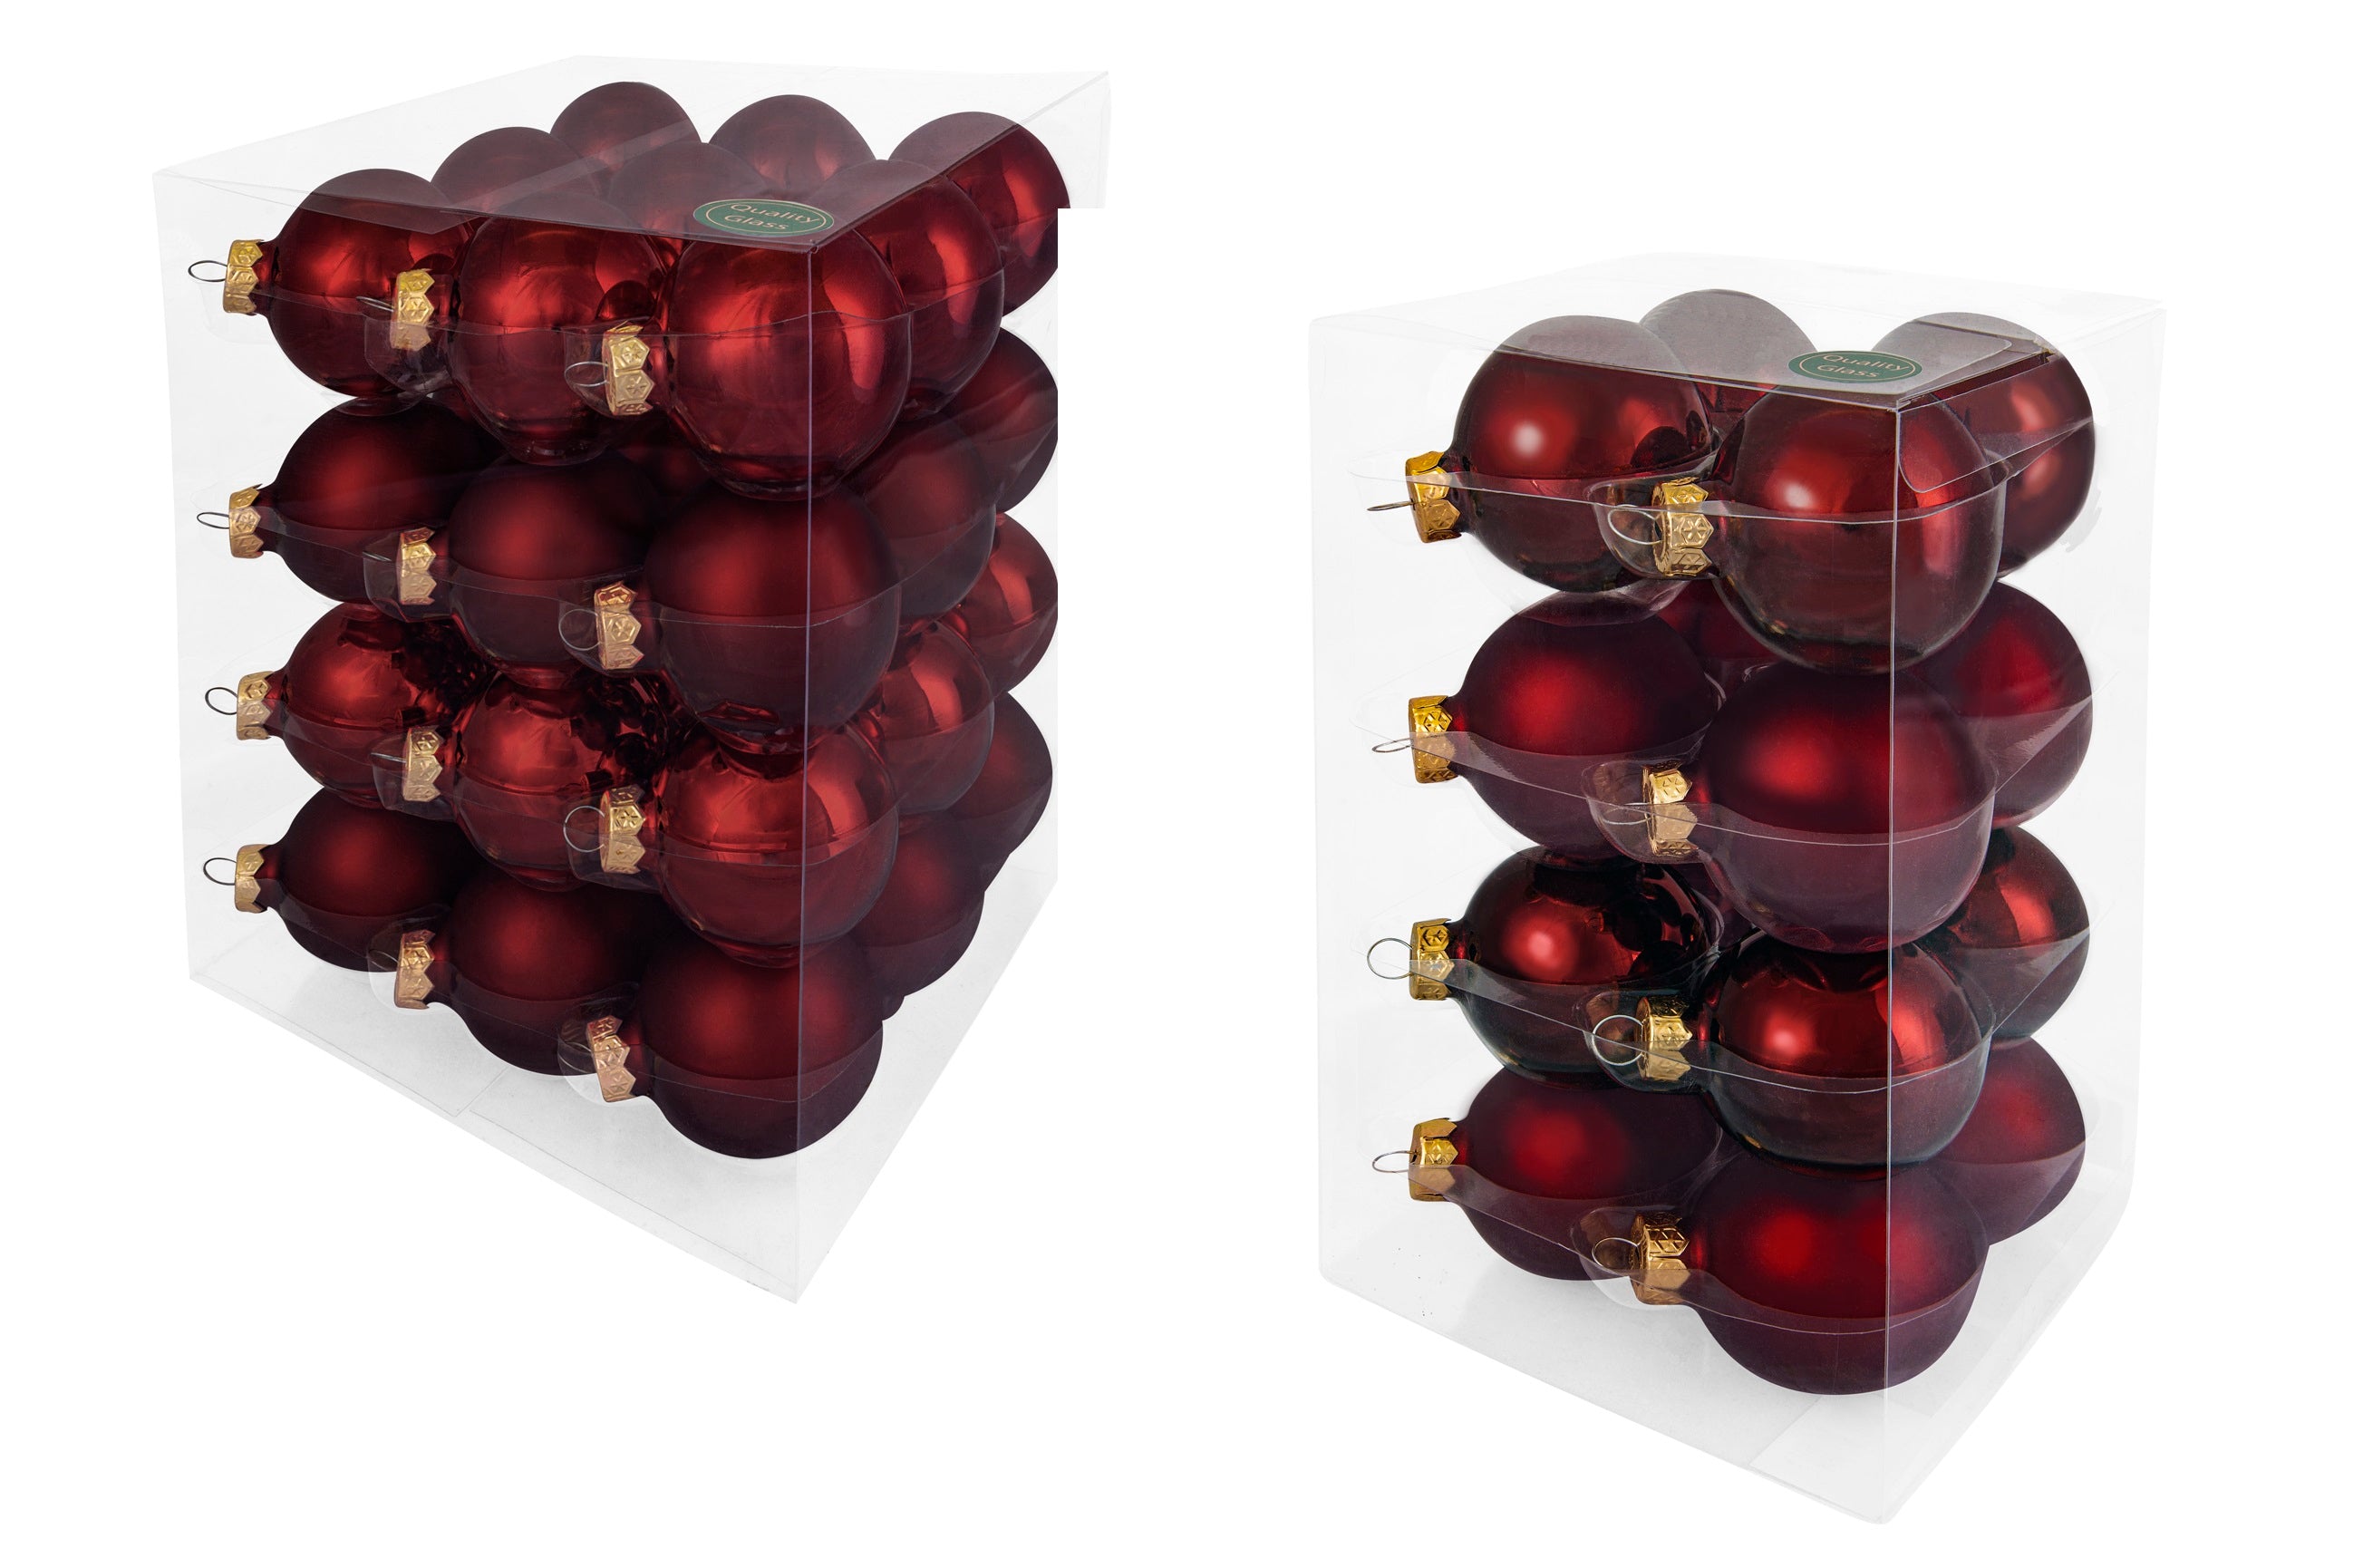 Glass Christmas Baubles (60mm) Box 52 pieces Dark Red Combi